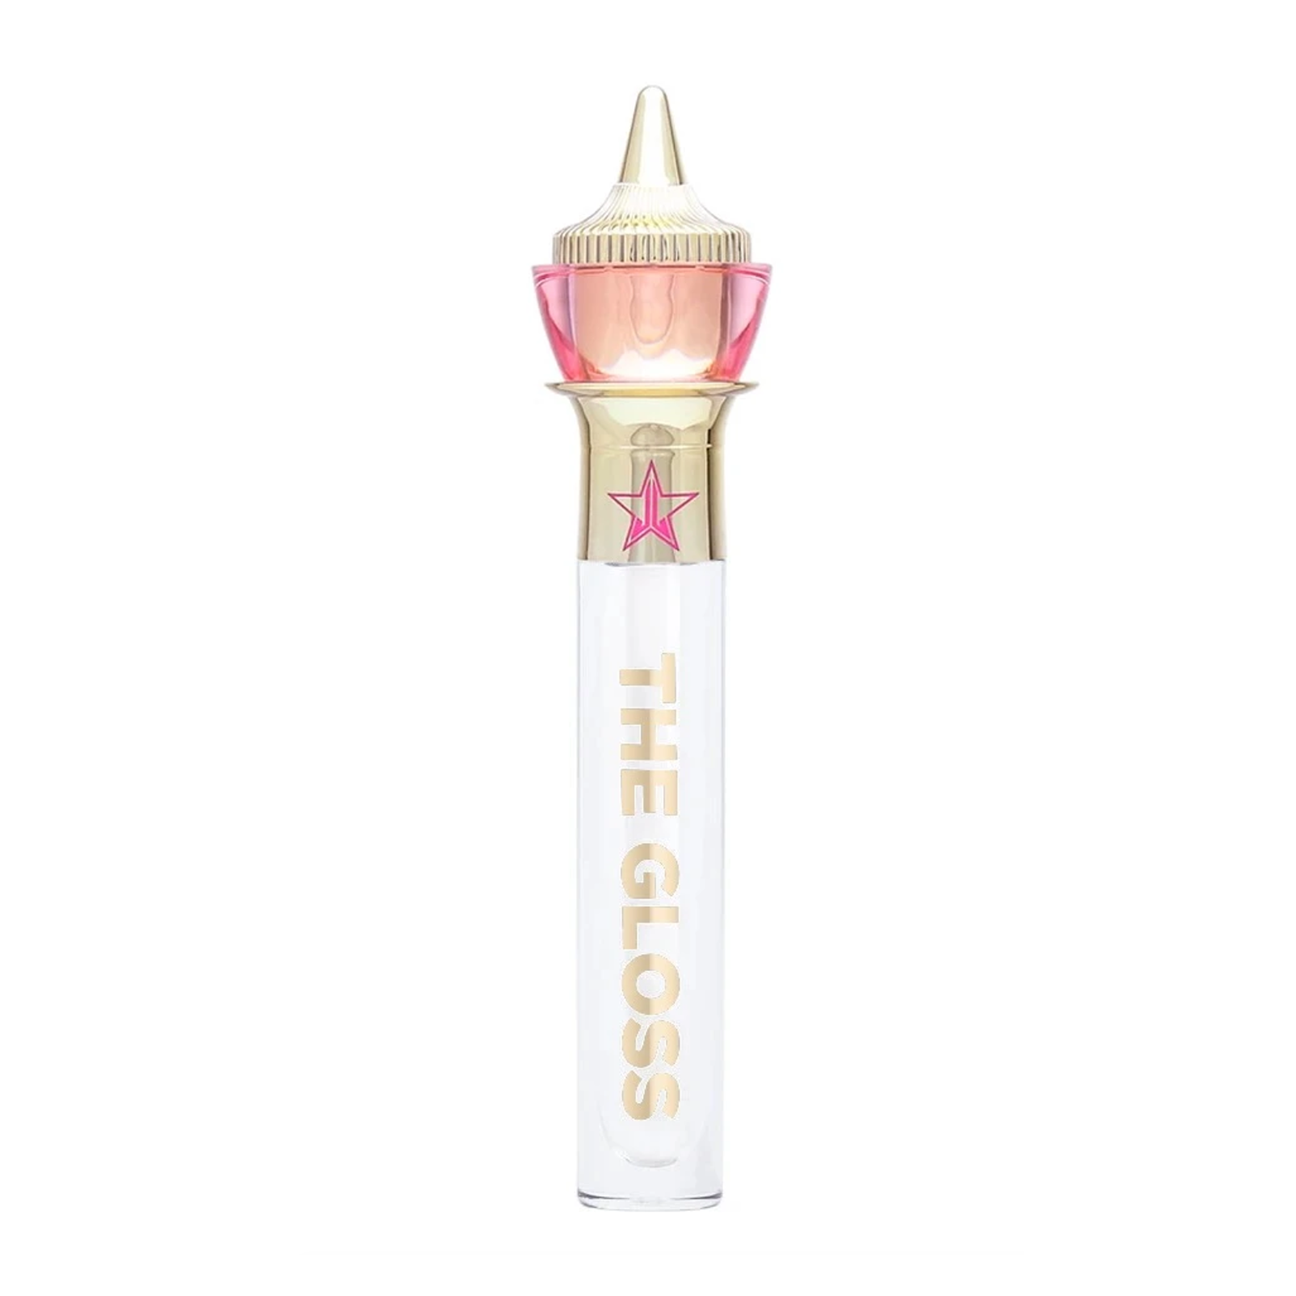 zJeffree Star Cosmetics The Gloss - Let Me Be Perfectly Clear